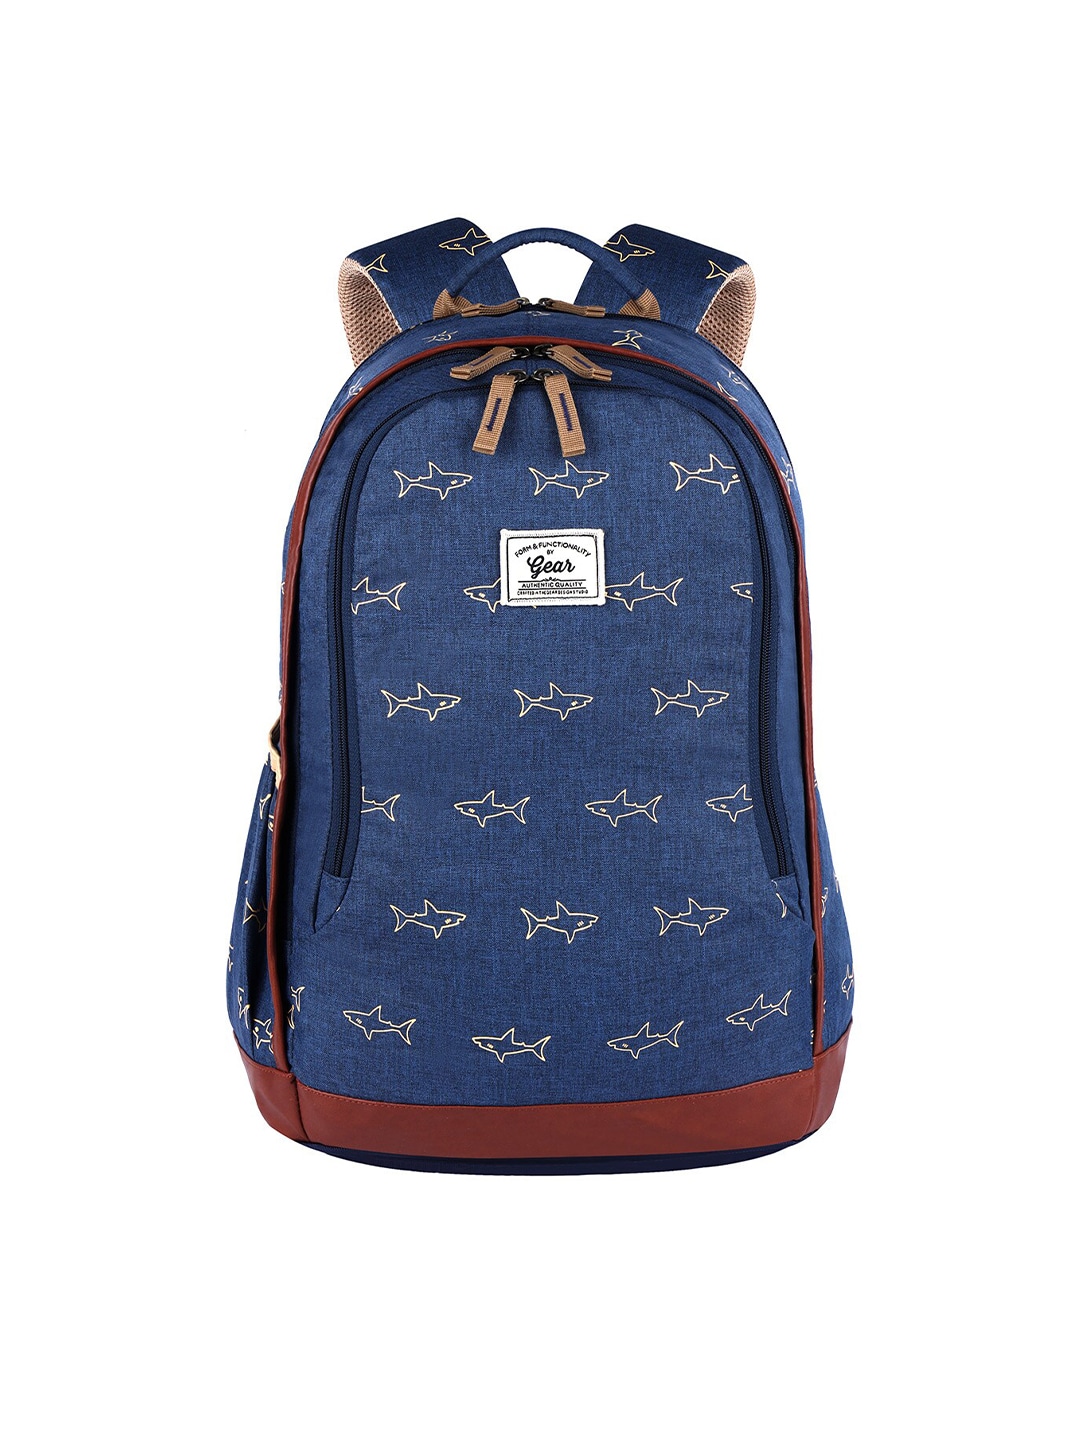 Gear Unisex Blue & Beige Graphic Printed Backpack With Rain Cover Price in India